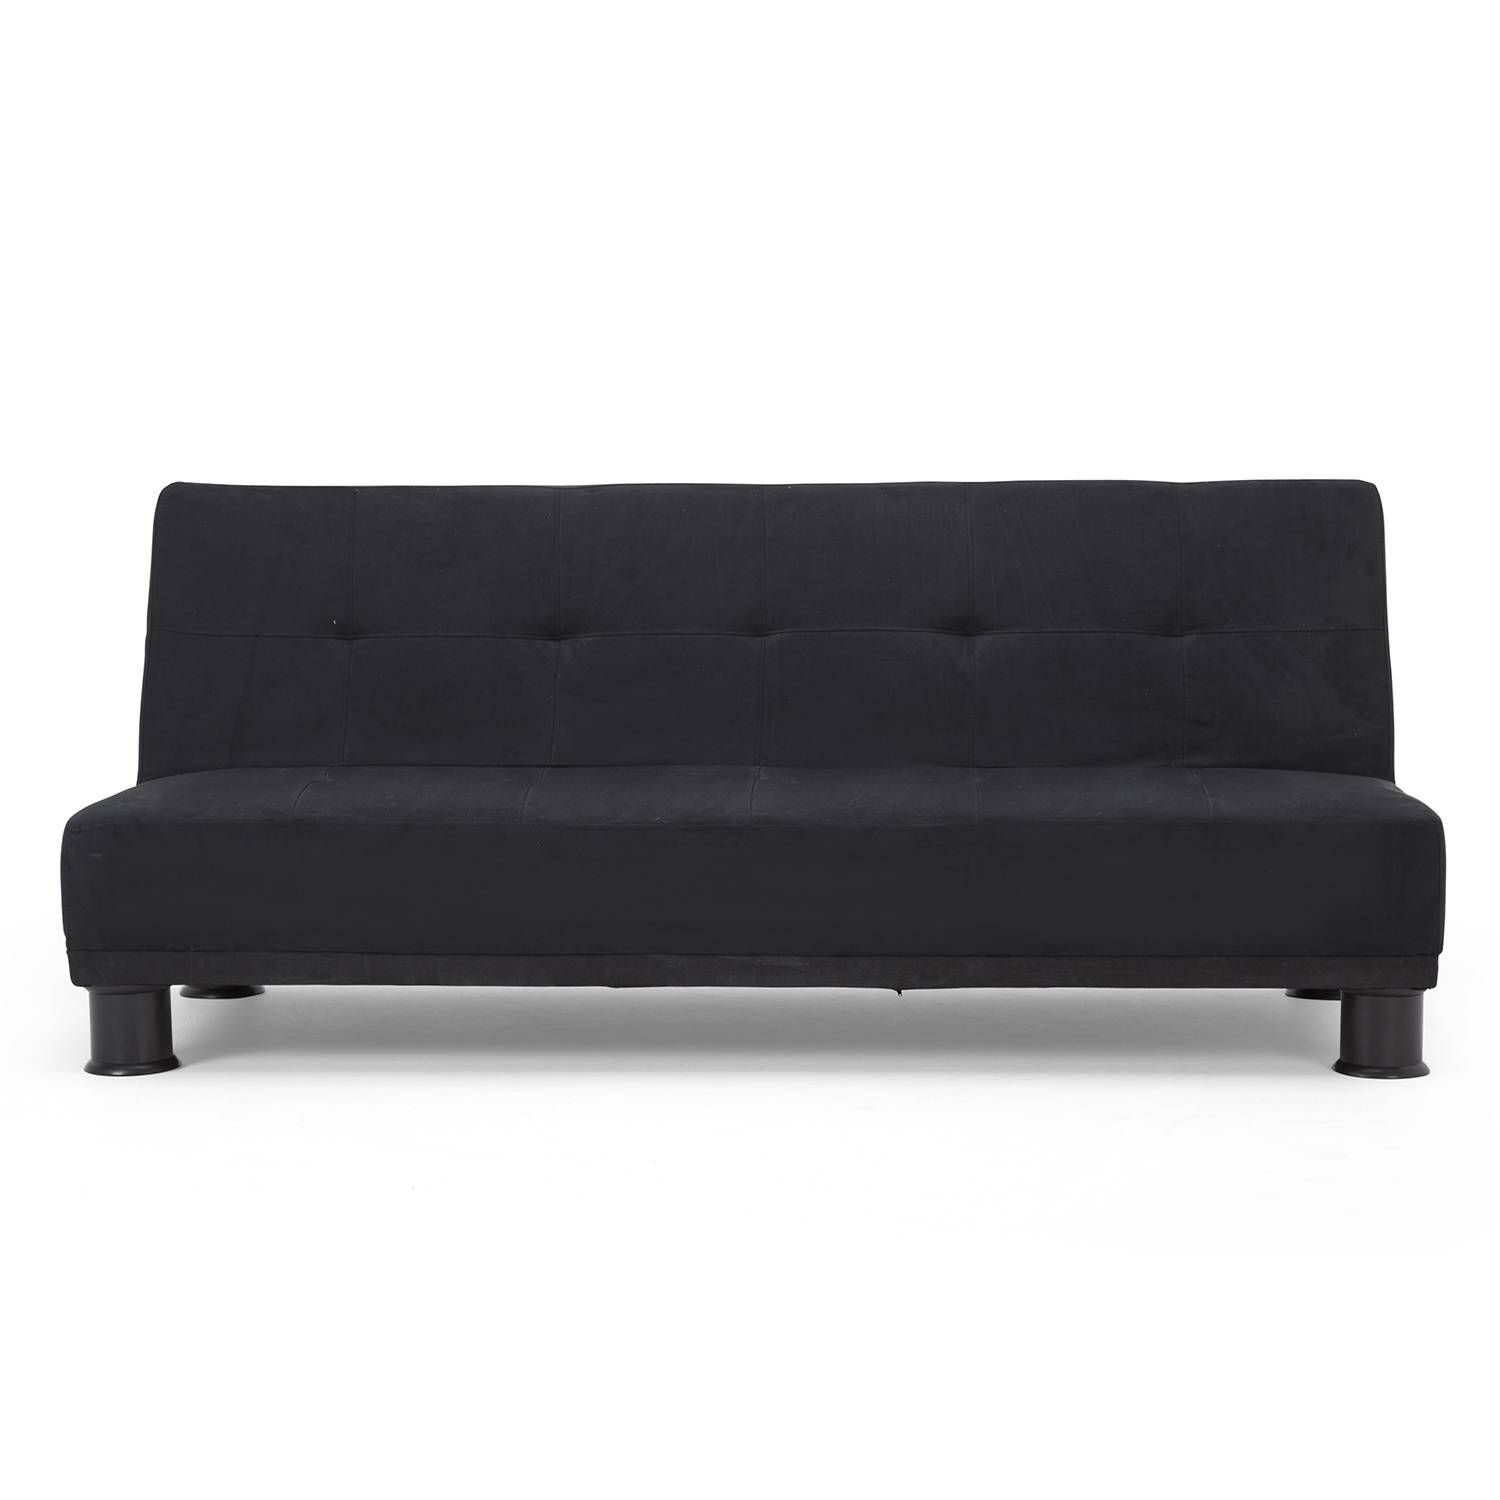 Ismi Faux Suede Sofa Bed – Next Day Delivery Ismi Faux Suede Sofa Bed Intended For Faux Suede Sofas (Photo 10 of 10)